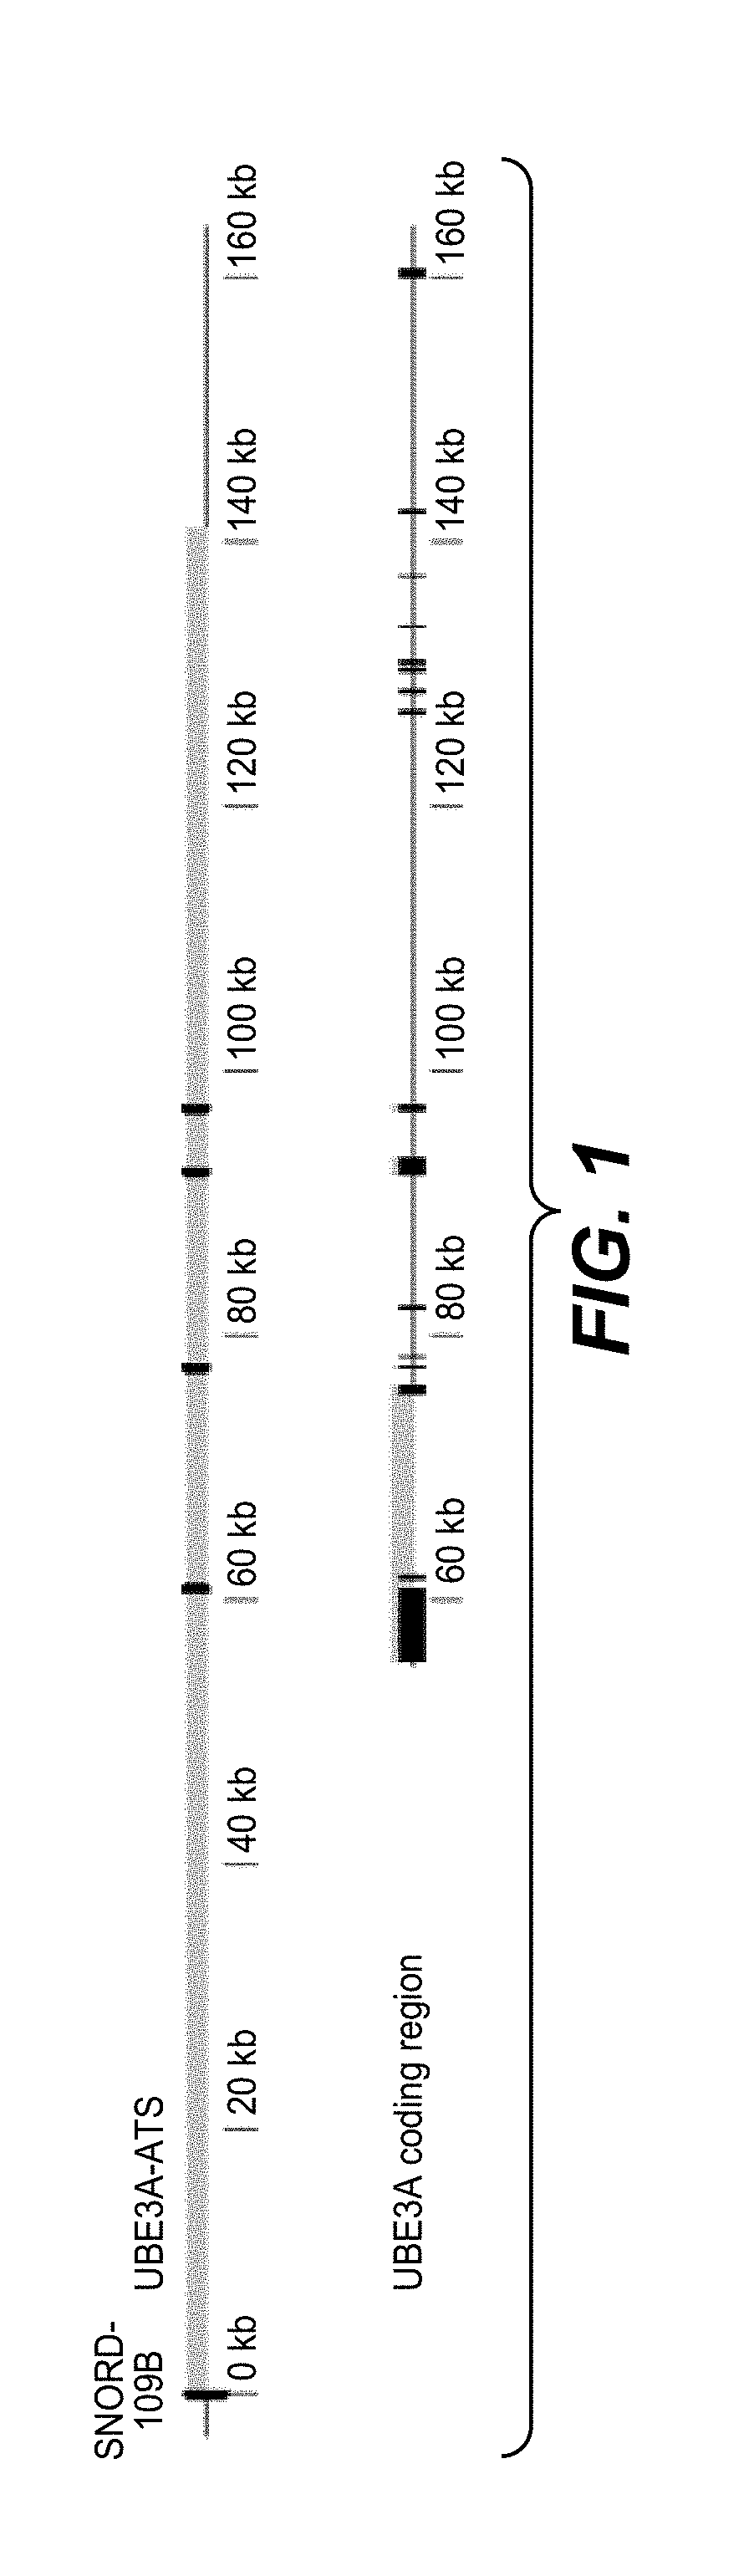 Methods for determining the efficacy profile of a drug candidate